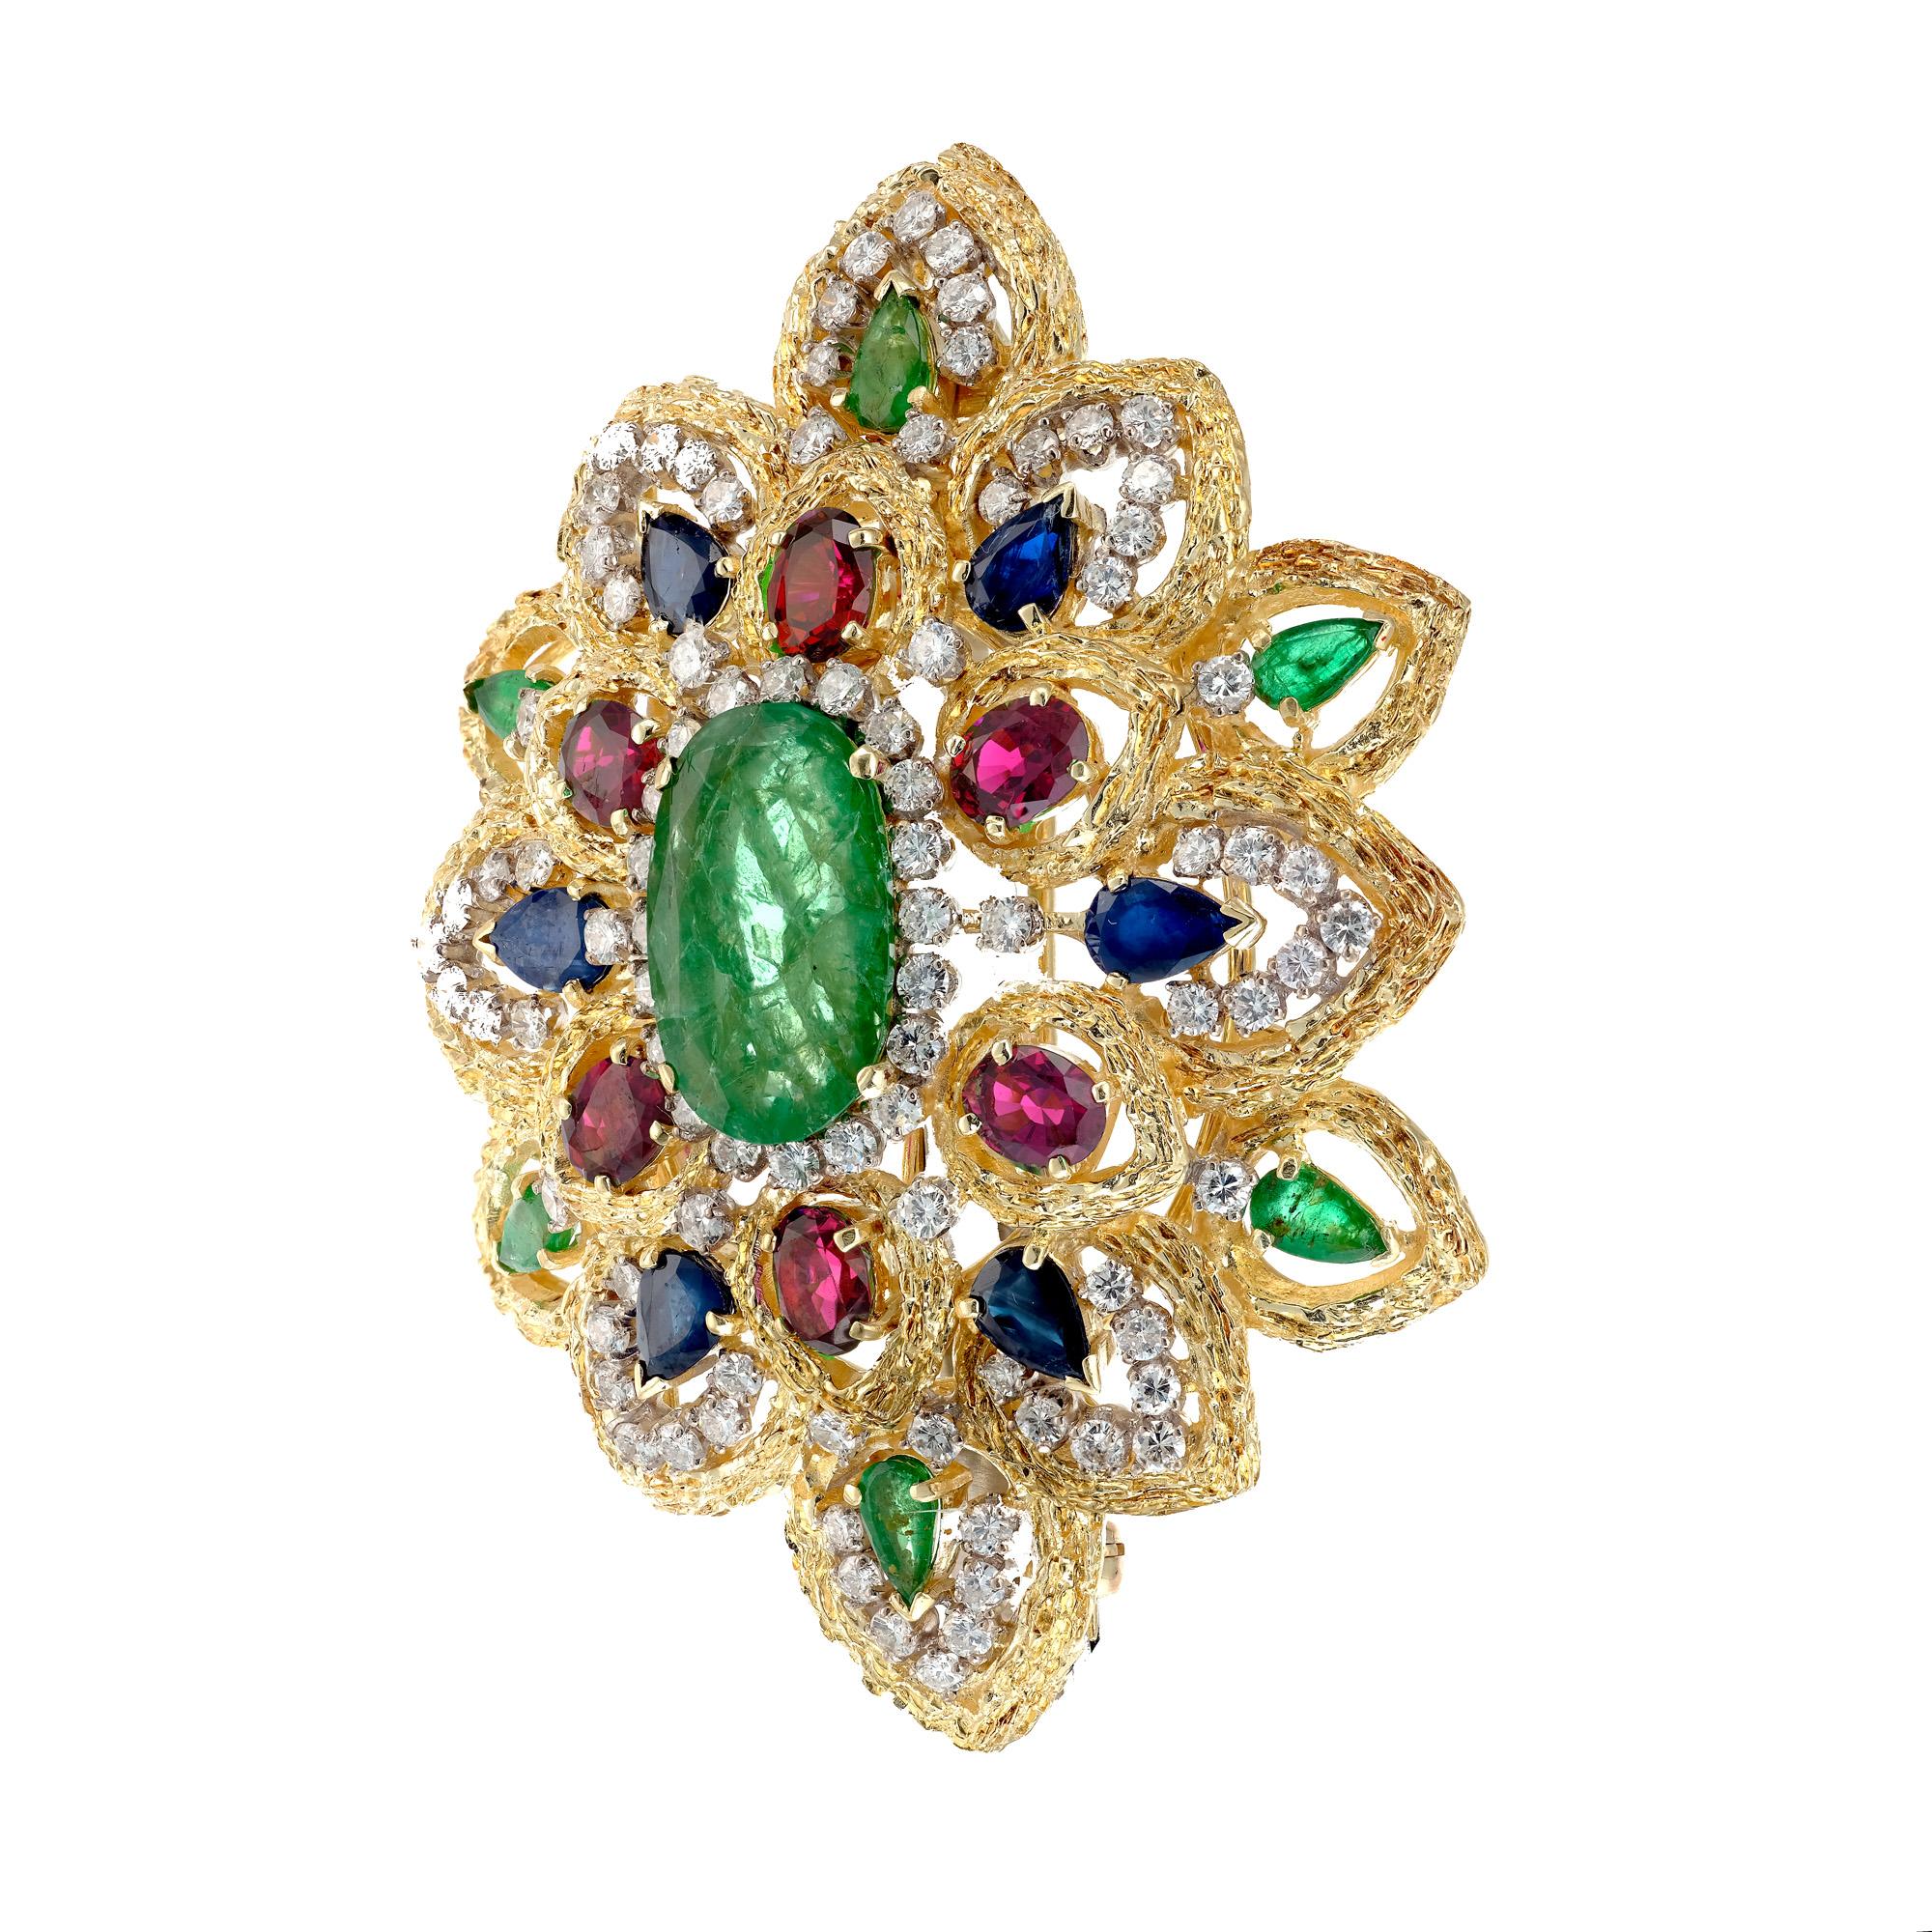 Emerald, Ruby, Sapphire and Diamond cluster brooch pendant. Large 14k yellow gold brooch witch can be worn as a pendant also. oval center emerald surrounded by oval rubies, pear shaped sapphires and round diamonds. GIA certified. See our matching